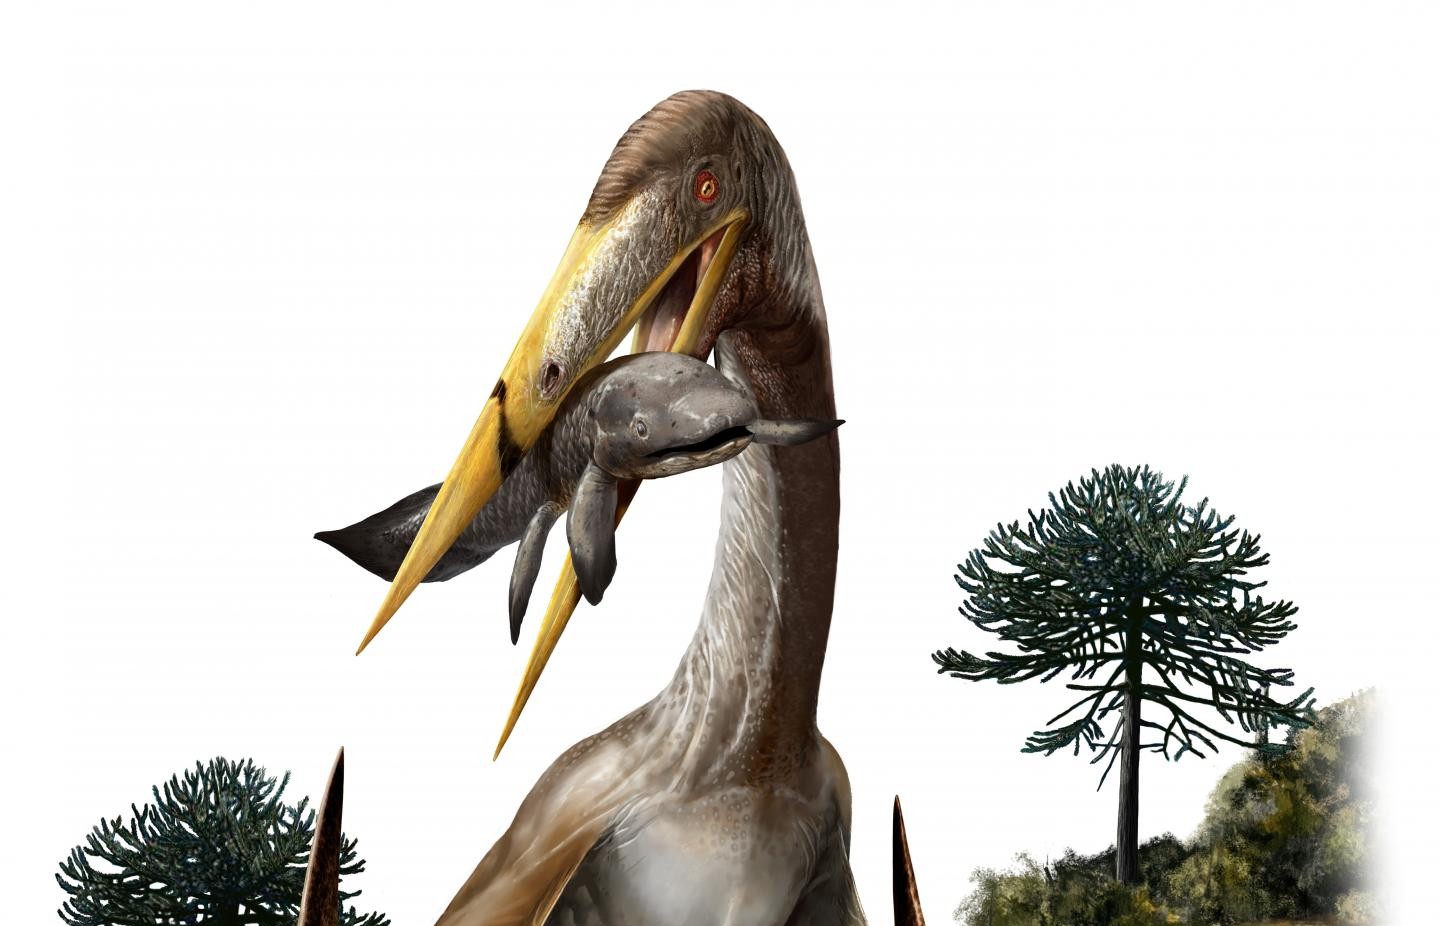 The biggest animal ever to fly was a reptile with a giraffe-like neck